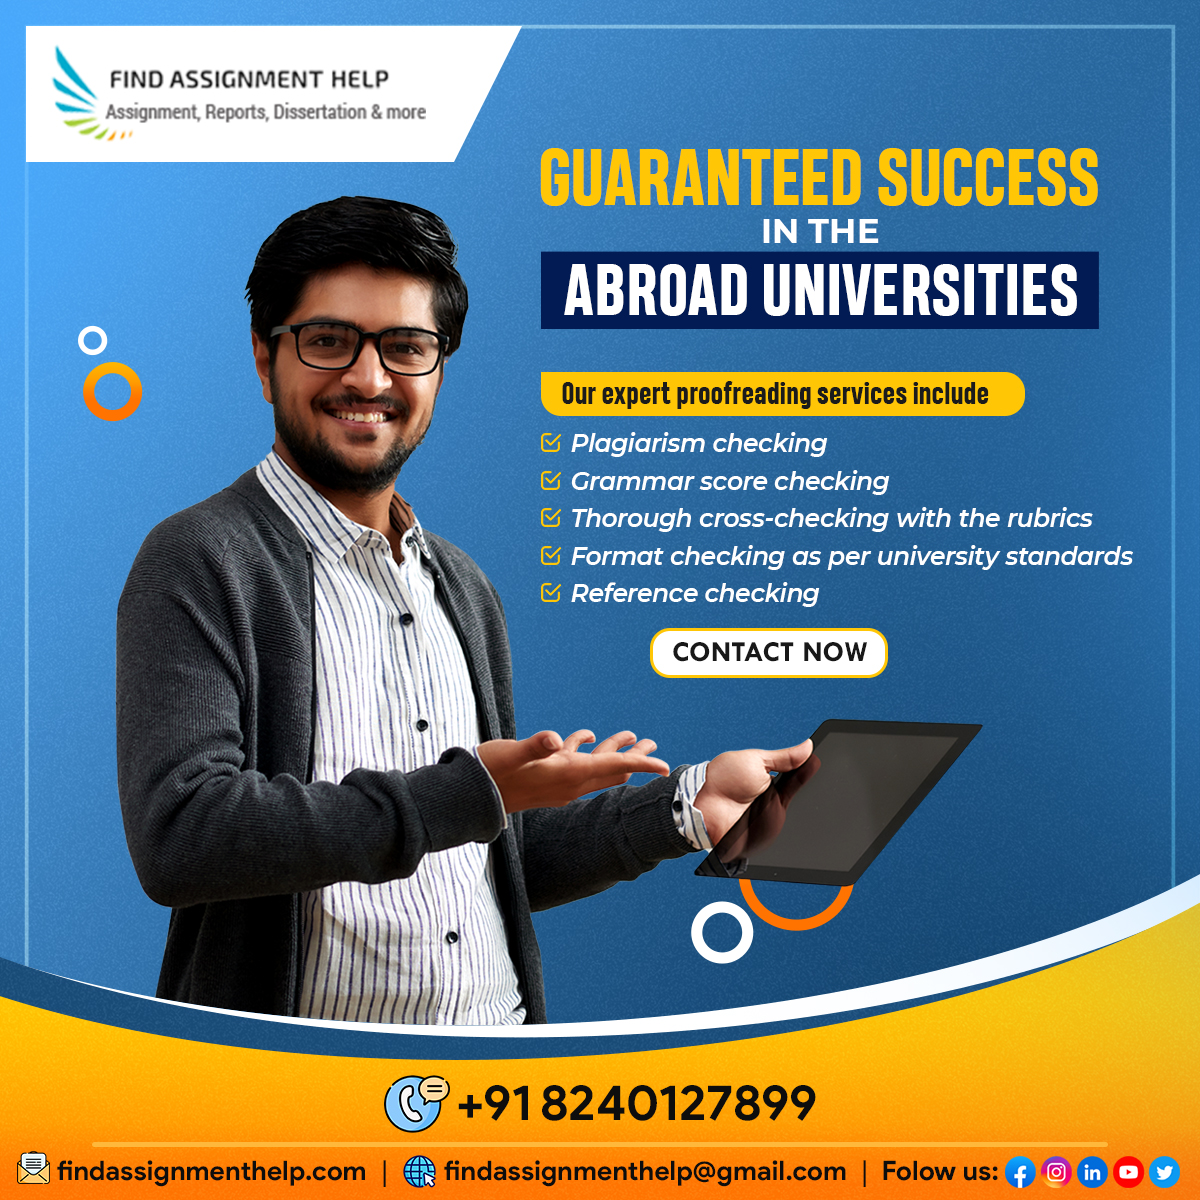 Know the tips and tricks for success in Universities abroad. Find Assignment Help helps you get top-notch marks for all your subjects.
Contact us today to know more!
#assignmenthelp #ukwritinghelp #ukdissertation #Canadastudypermit #CanadaImmigration #australiastudyvisa